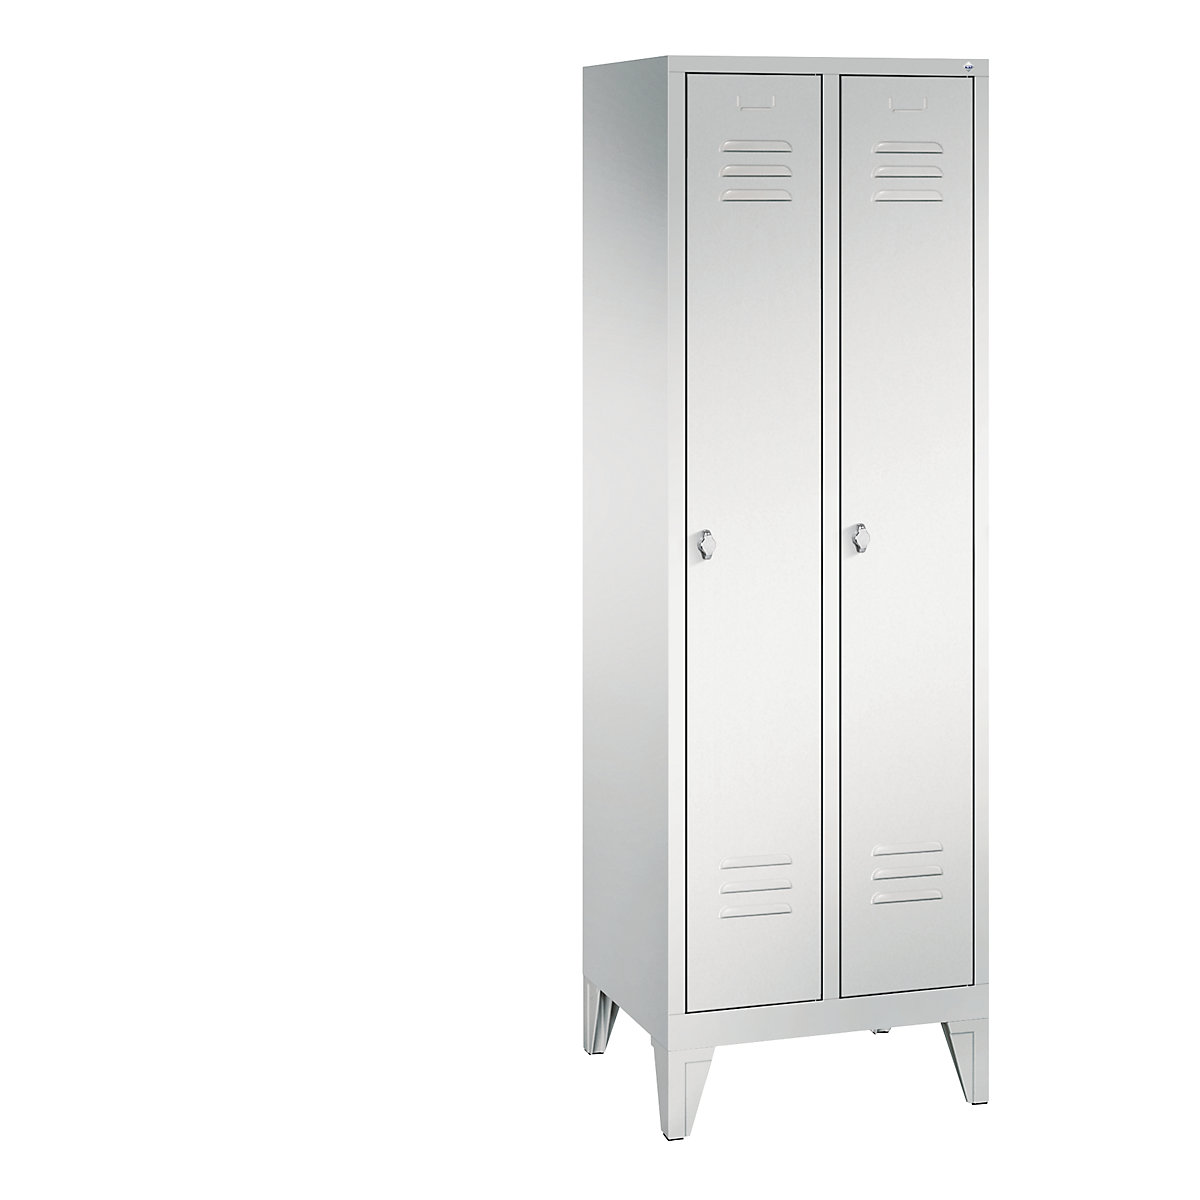 CLASSIC cloakroom locker with feet – C+P, 2 compartments, compartment width 300 mm, light grey-6